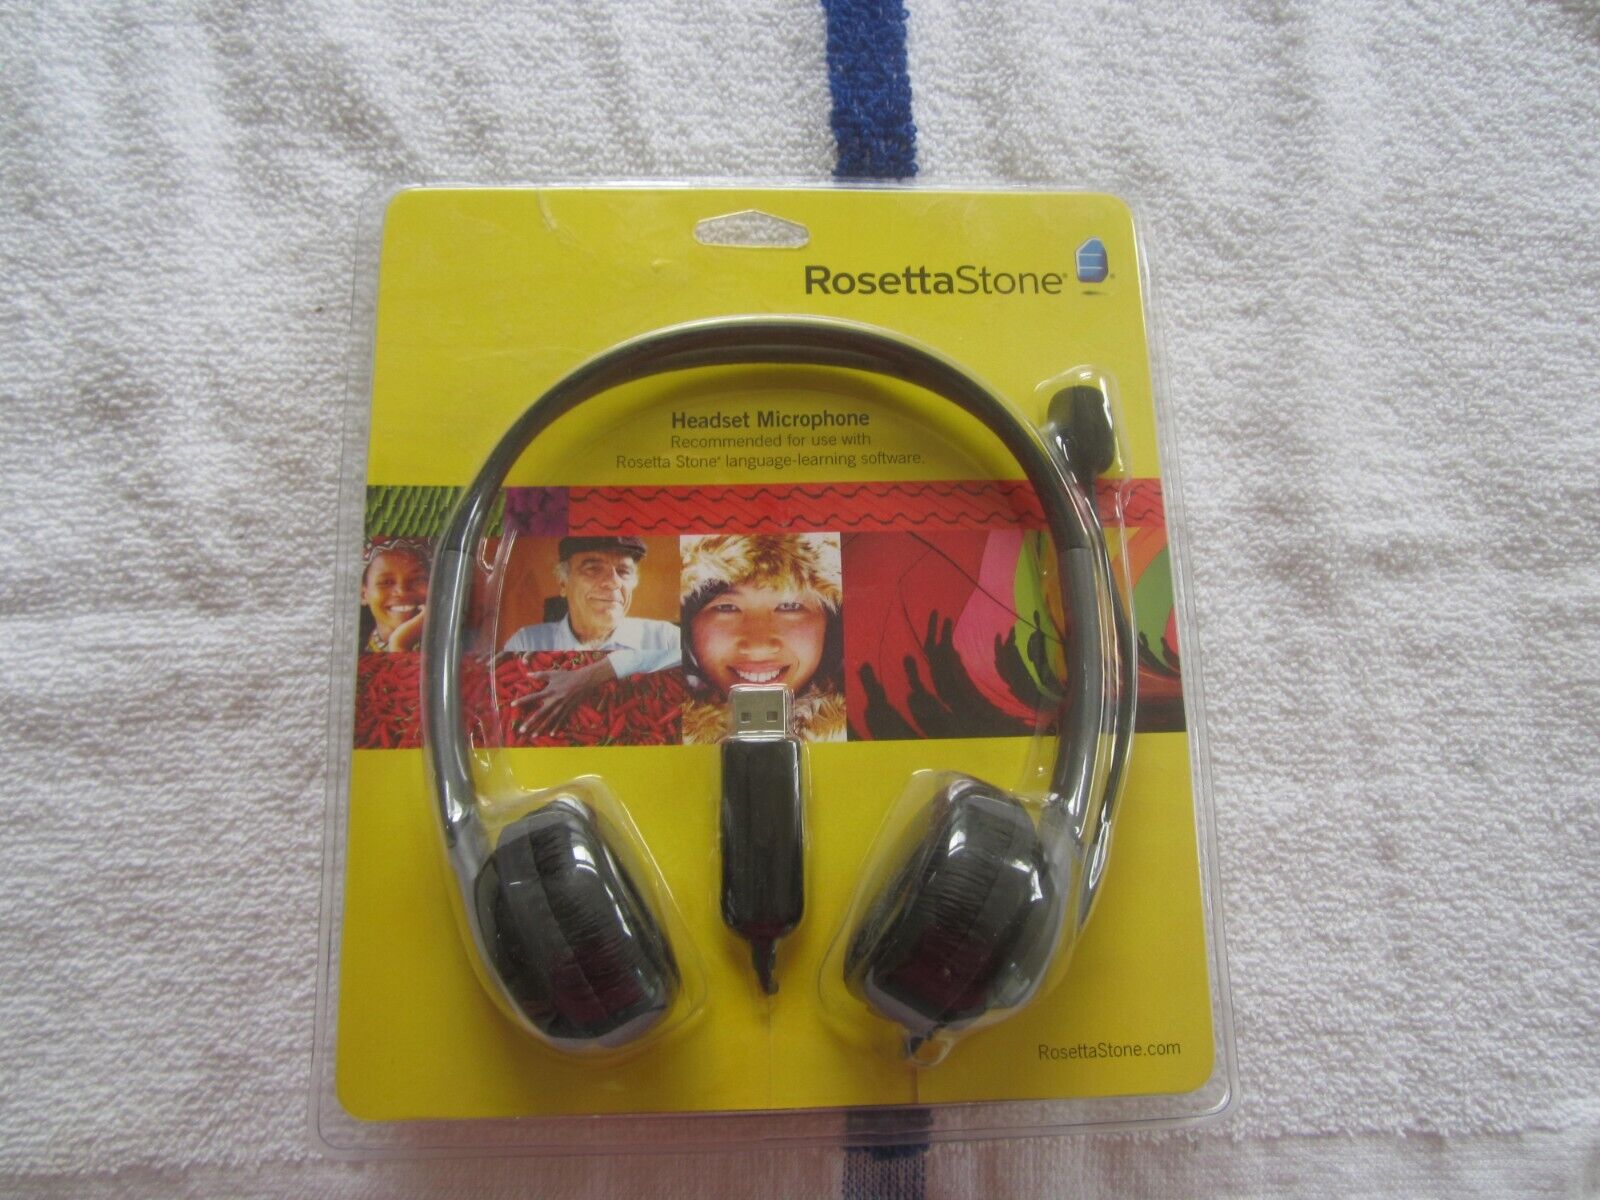 New & Sealed Rosetta Stone Headset Microphone USB For Language Learning Software